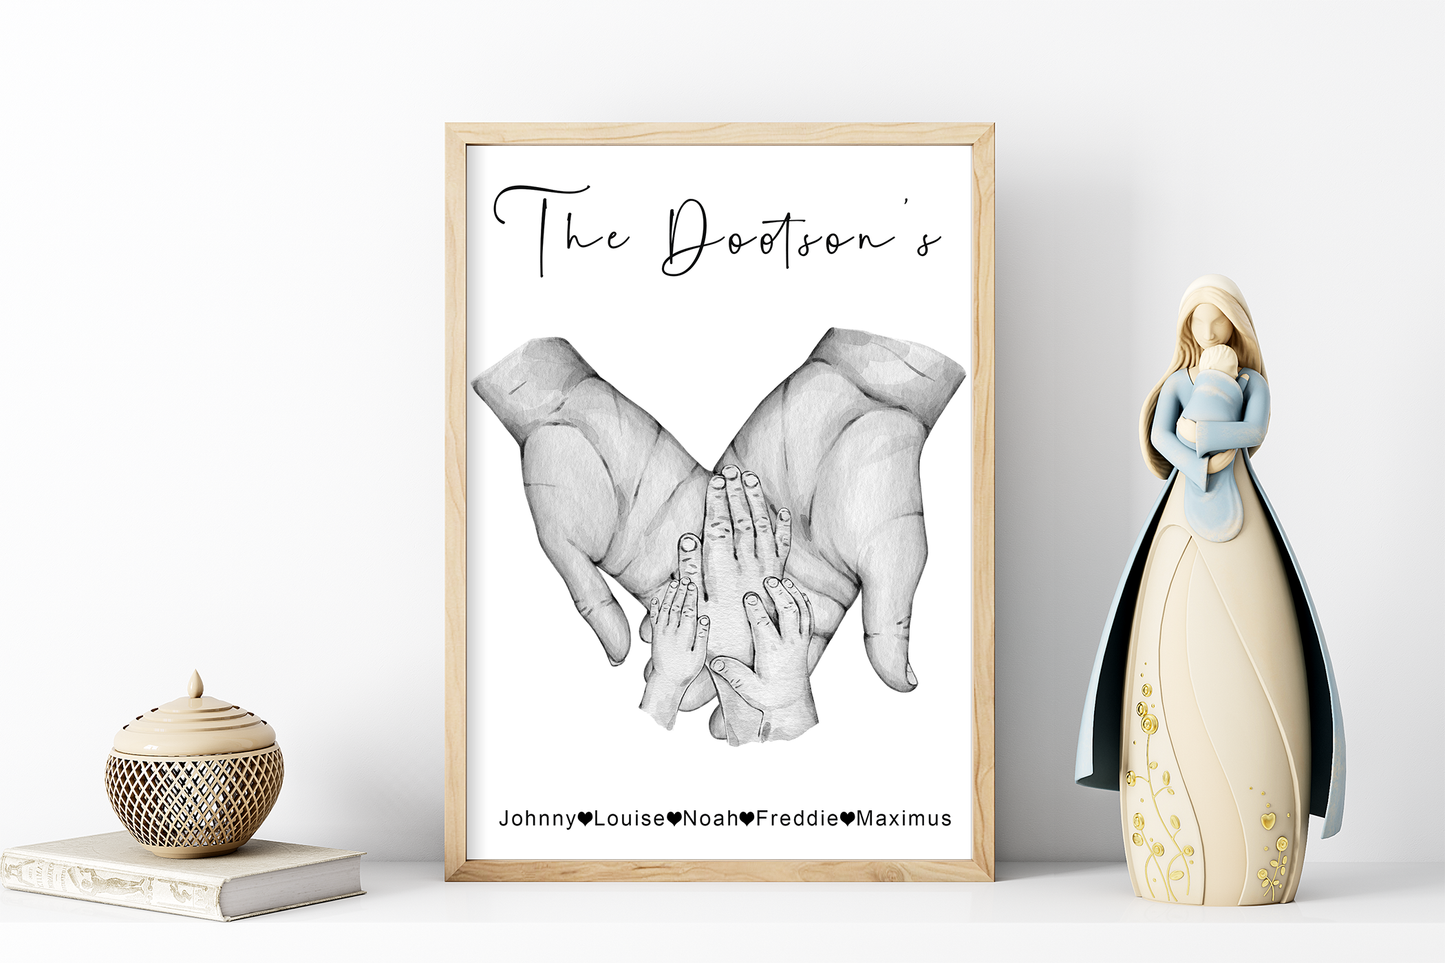 Custom family hands print | Black and white family paw portraits | New baby gift | New parents picture A3 | A4 | A5 | Greeting card